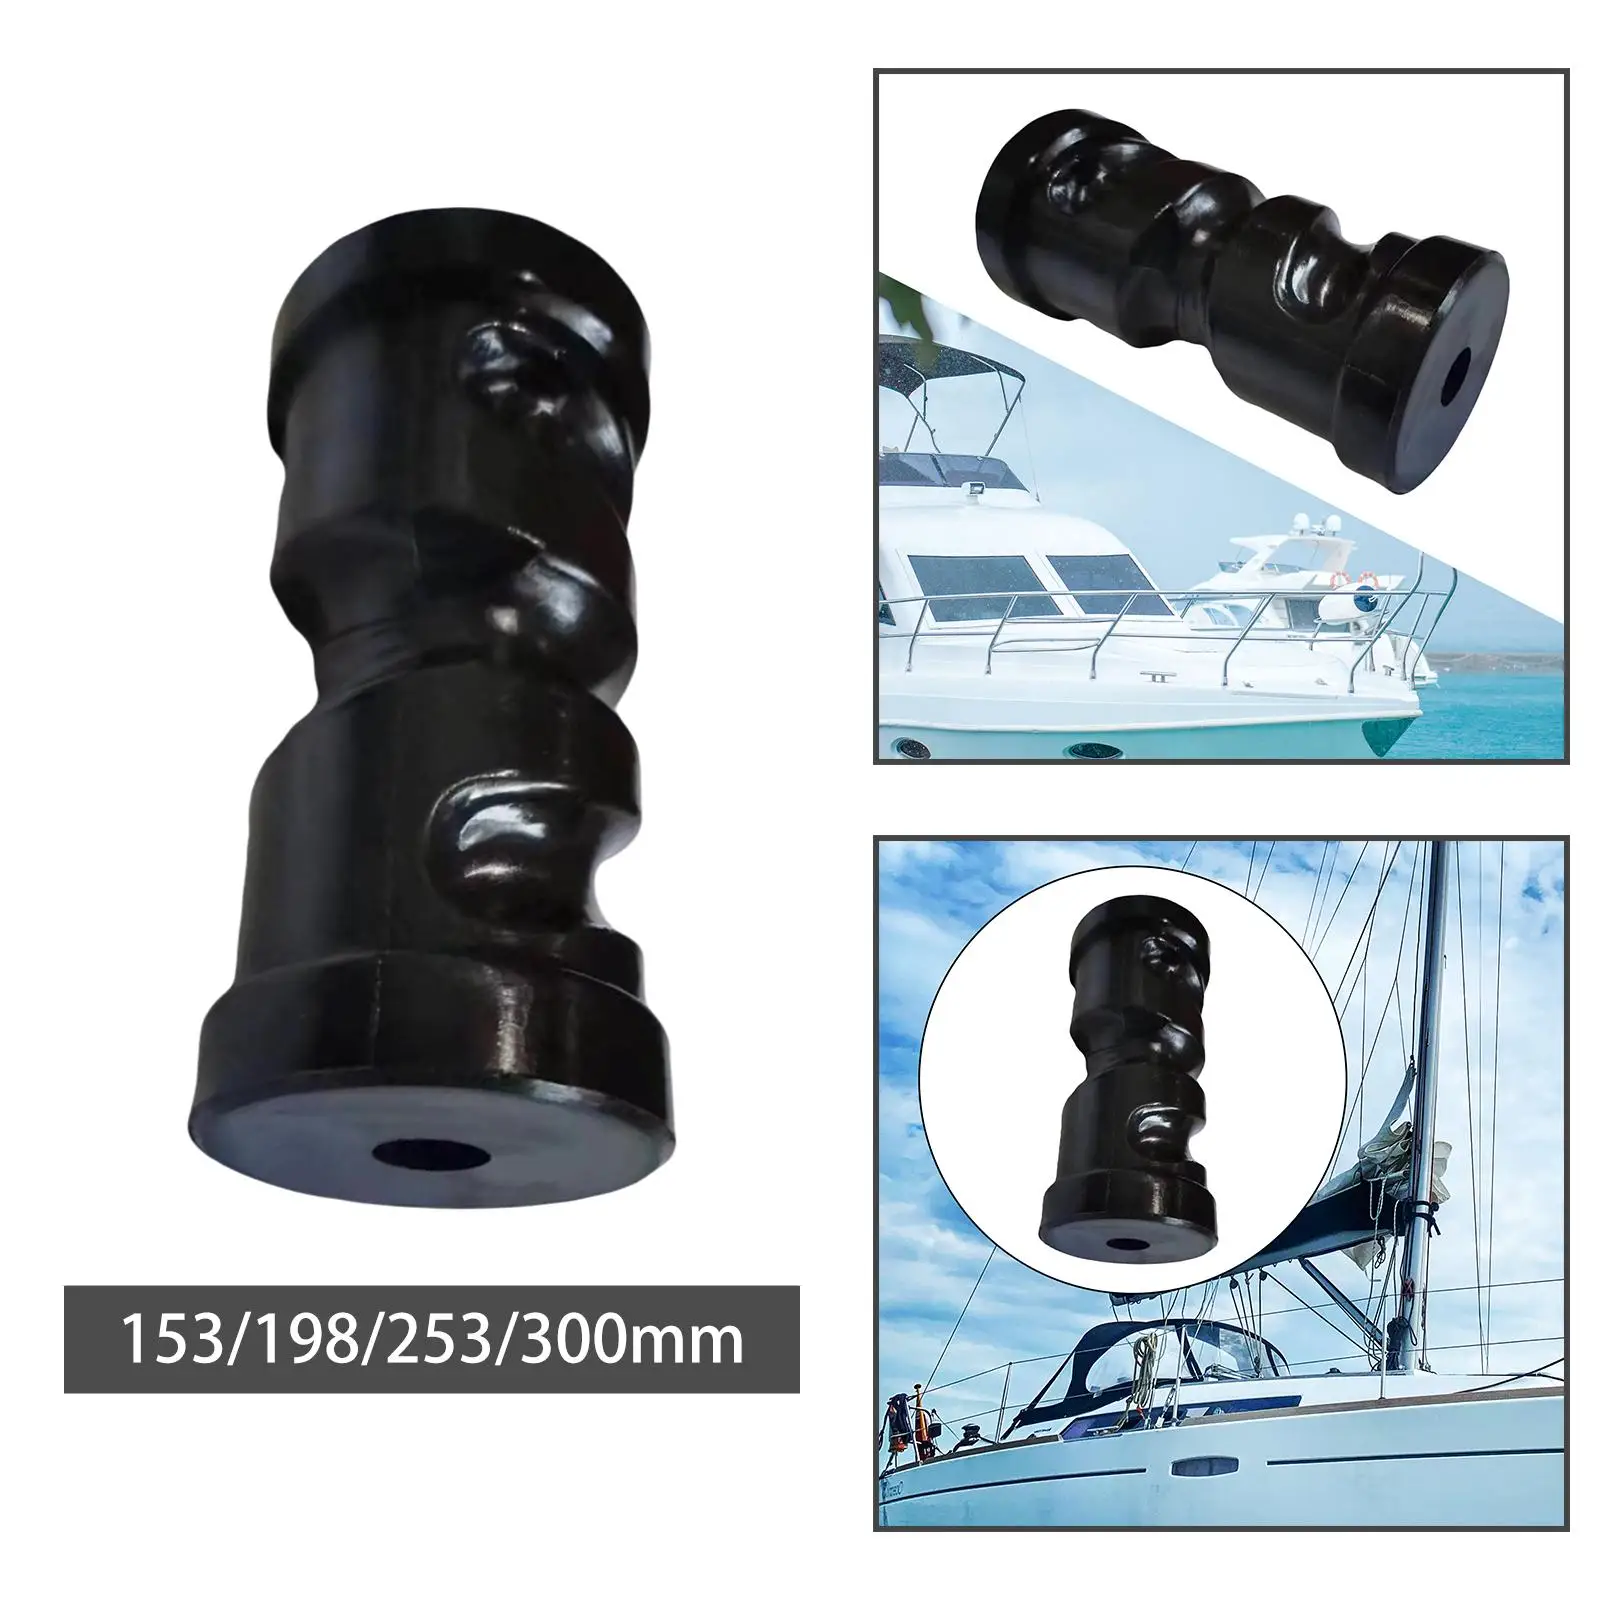 Keel Roller Accessories PU Leather Heavy Duty Repair for Professional Easily Install Direct Replacement High Performance